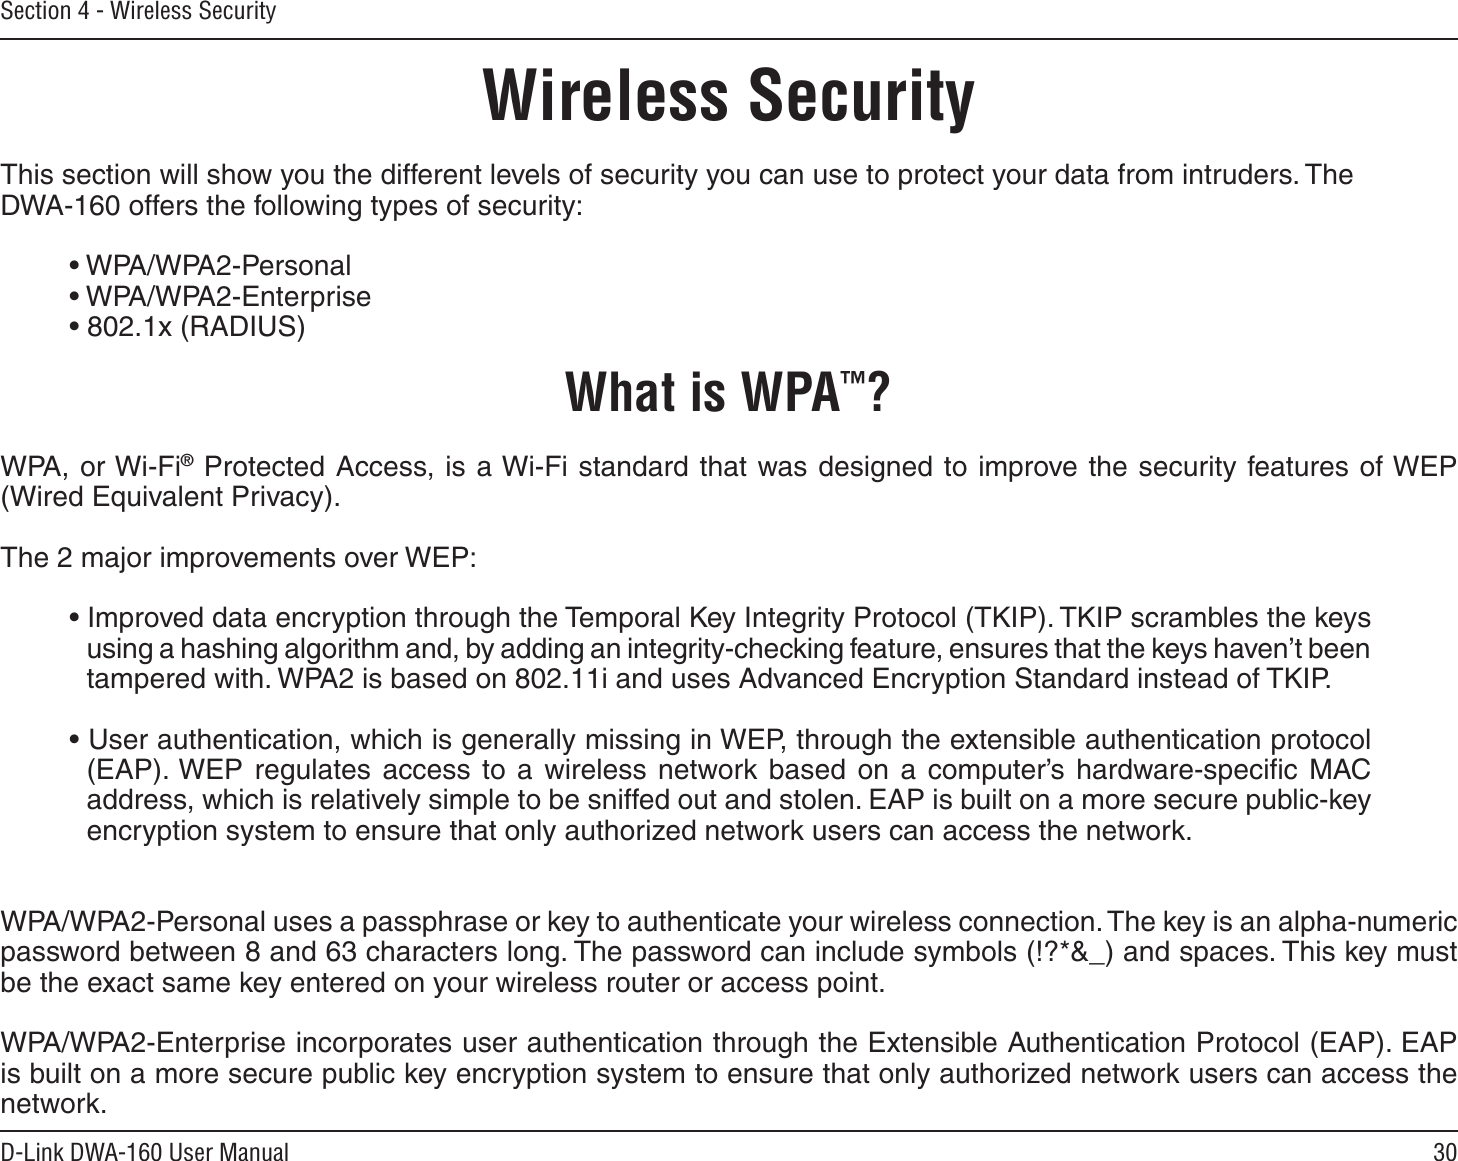 30D-Link DWA-160 User ManualSection 4 - Wireless SecurityWireless SecurityThis section will show you the different levels of security you can use to protect your data from intruders. The DWA-160 offers the following types of security:• WPA/WPA2-Personal     • WPA/WPA2-Enterprise• 802.1x (RADIUS)What is WPA™?WPA, or Wi-Fi® Protected Access, is a Wi-Fi standard that was designed to improve the security features of WEP (Wired Equivalent Privacy).  The 2 major improvements over WEP: • Improved data encryption through the Temporal Key Integrity Protocol (TKIP). TKIP scrambles the keys using a hashing algorithm and, by adding an integrity-checking feature, ensures that the keys haven’t been tampered with. WPA2 is based on 802.11i and uses Advanced Encryption Standard instead of TKIP.• User authentication, which is generally missing in WEP, through the extensible authentication protocol (EAP). WEP regulates access to a wireless network based on a computer’s hardware-speciﬁc MAC address, which is relatively simple to be sniffed out and stolen. EAP is built on a more secure public-key encryption system to ensure that only authorized network users can access the network.WPA/WPA2-Personal uses a passphrase or key to authenticate your wireless connection. The key is an alpha-numeric password between 8 and 63 characters long. The password can include symbols (!?*&amp;_) and spaces. This key must be the exact same key entered on your wireless router or access point.WPA/WPA2-Enterprise incorporates user authentication through the Extensible Authentication Protocol (EAP). EAP is built on a more secure public key encryption system to ensure that only authorized network users can access the network.